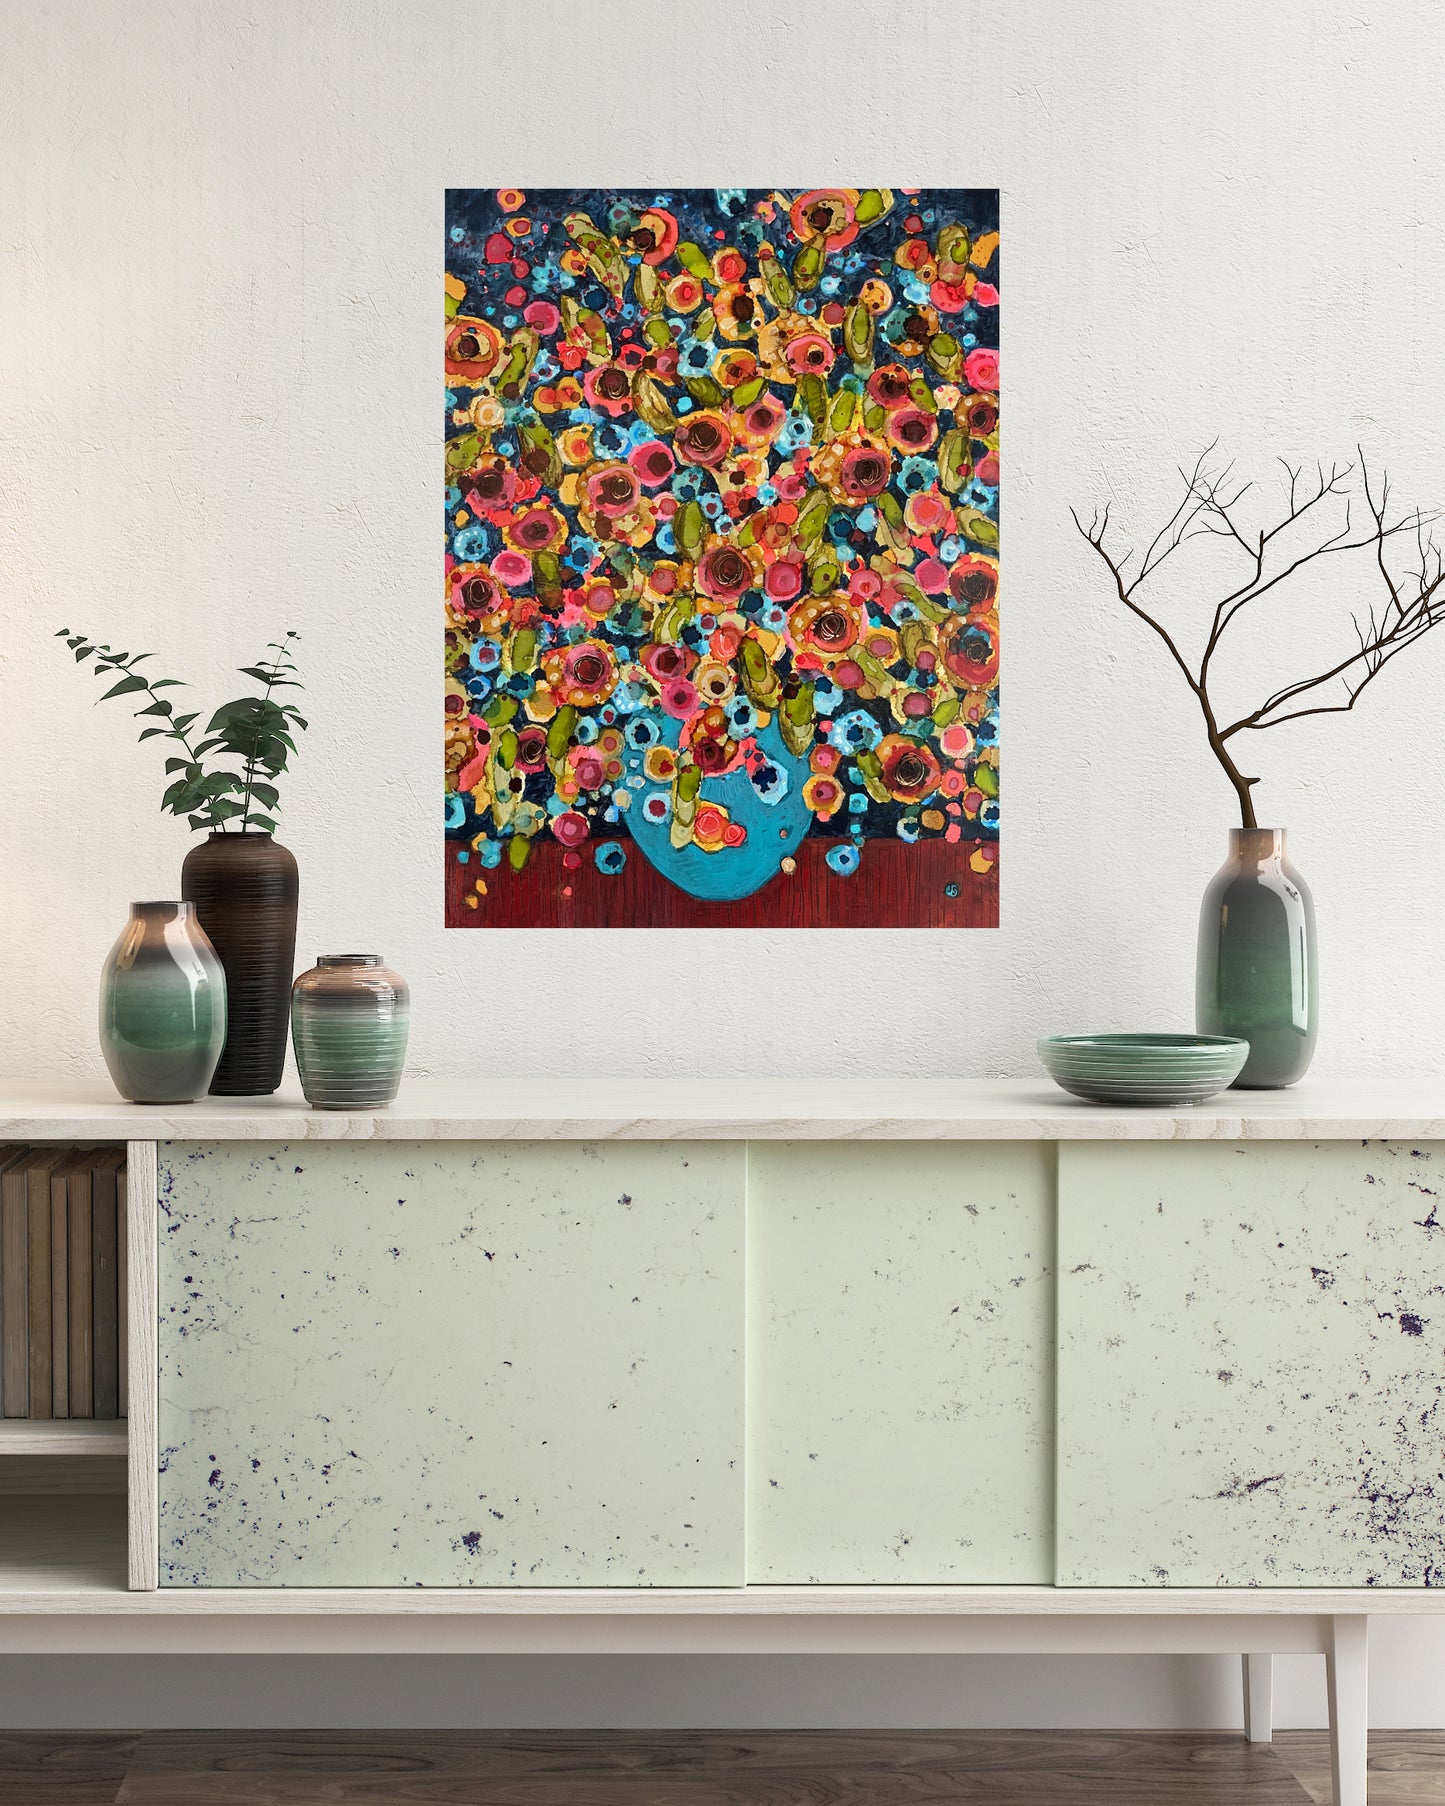 Colorful Abstract Floral Mixed Media Painting